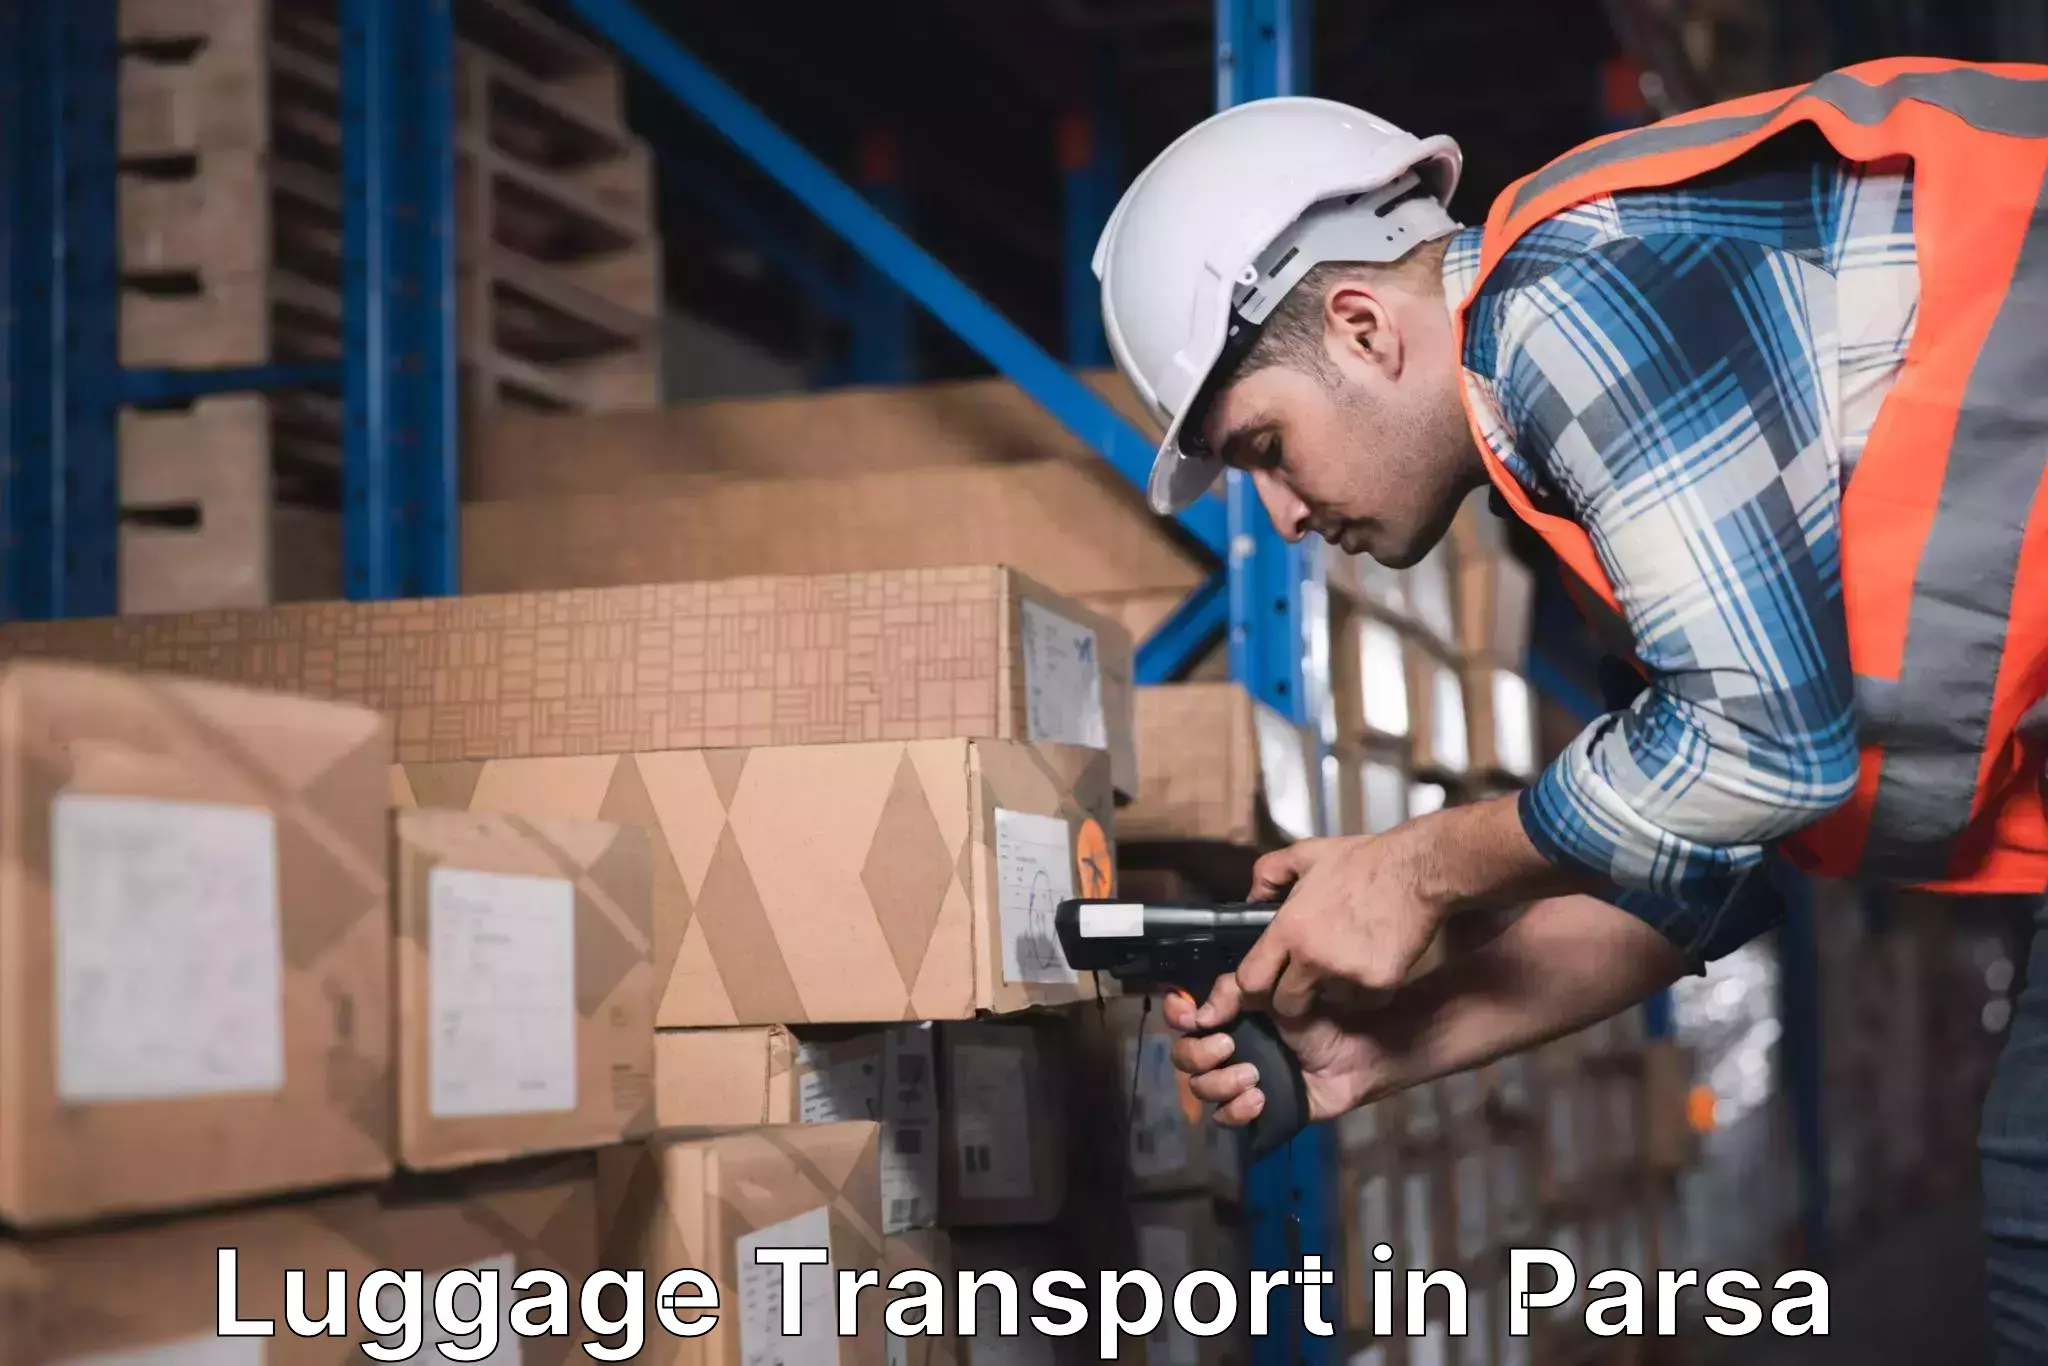 Luggage transport consulting in Parsa